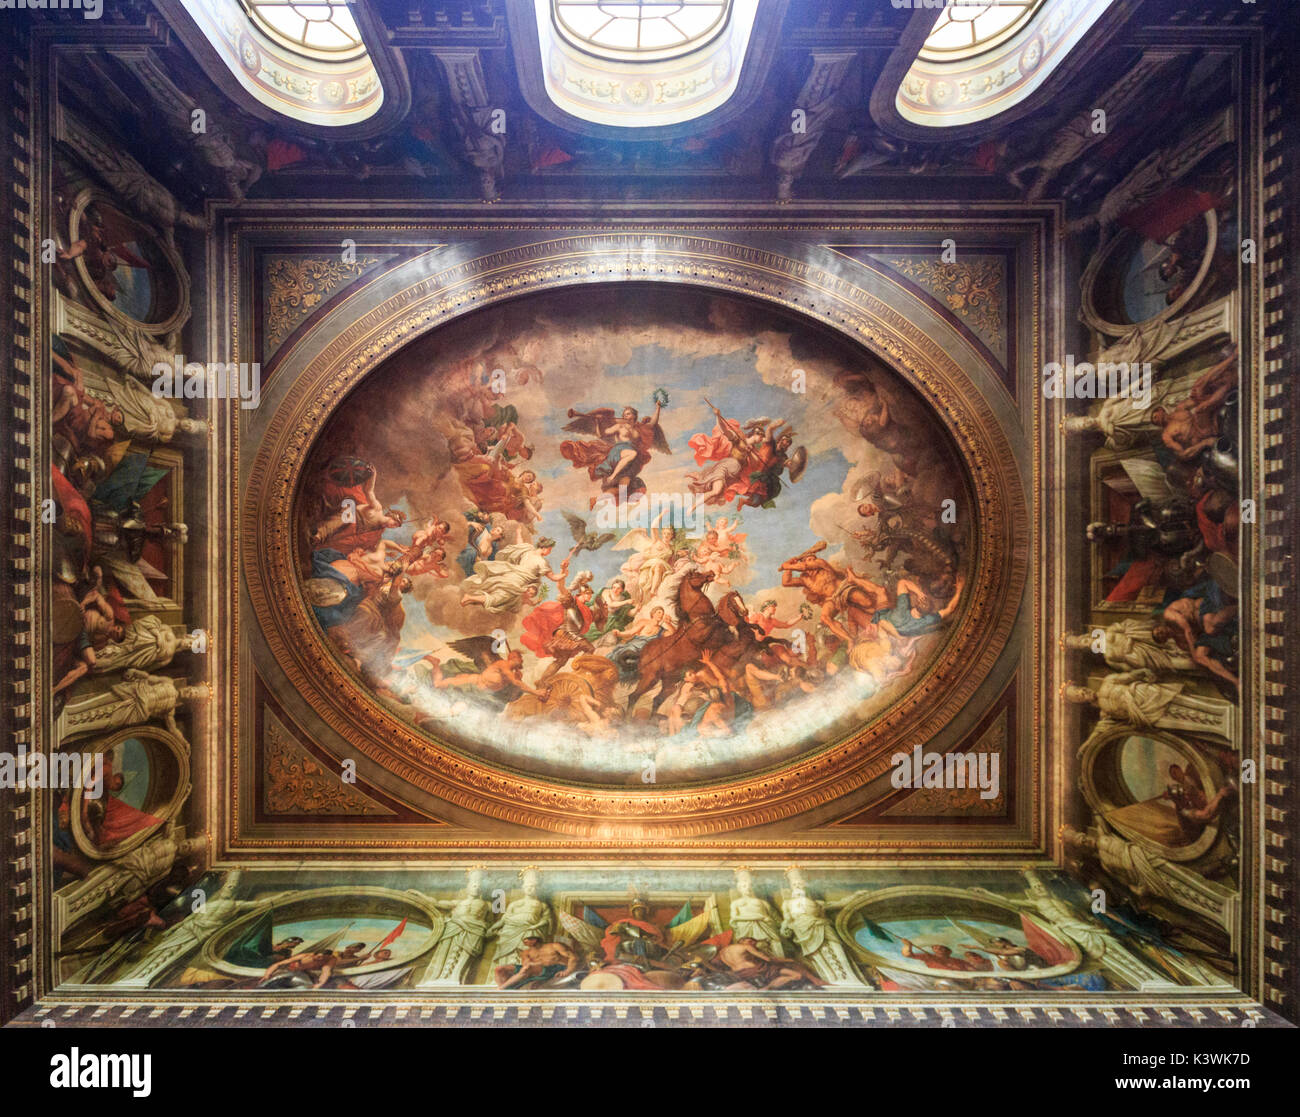 The Triumph of the Duke of Marlborough ceiling painting in the Grand Salon at Blenheim Palace, England Stock Photo